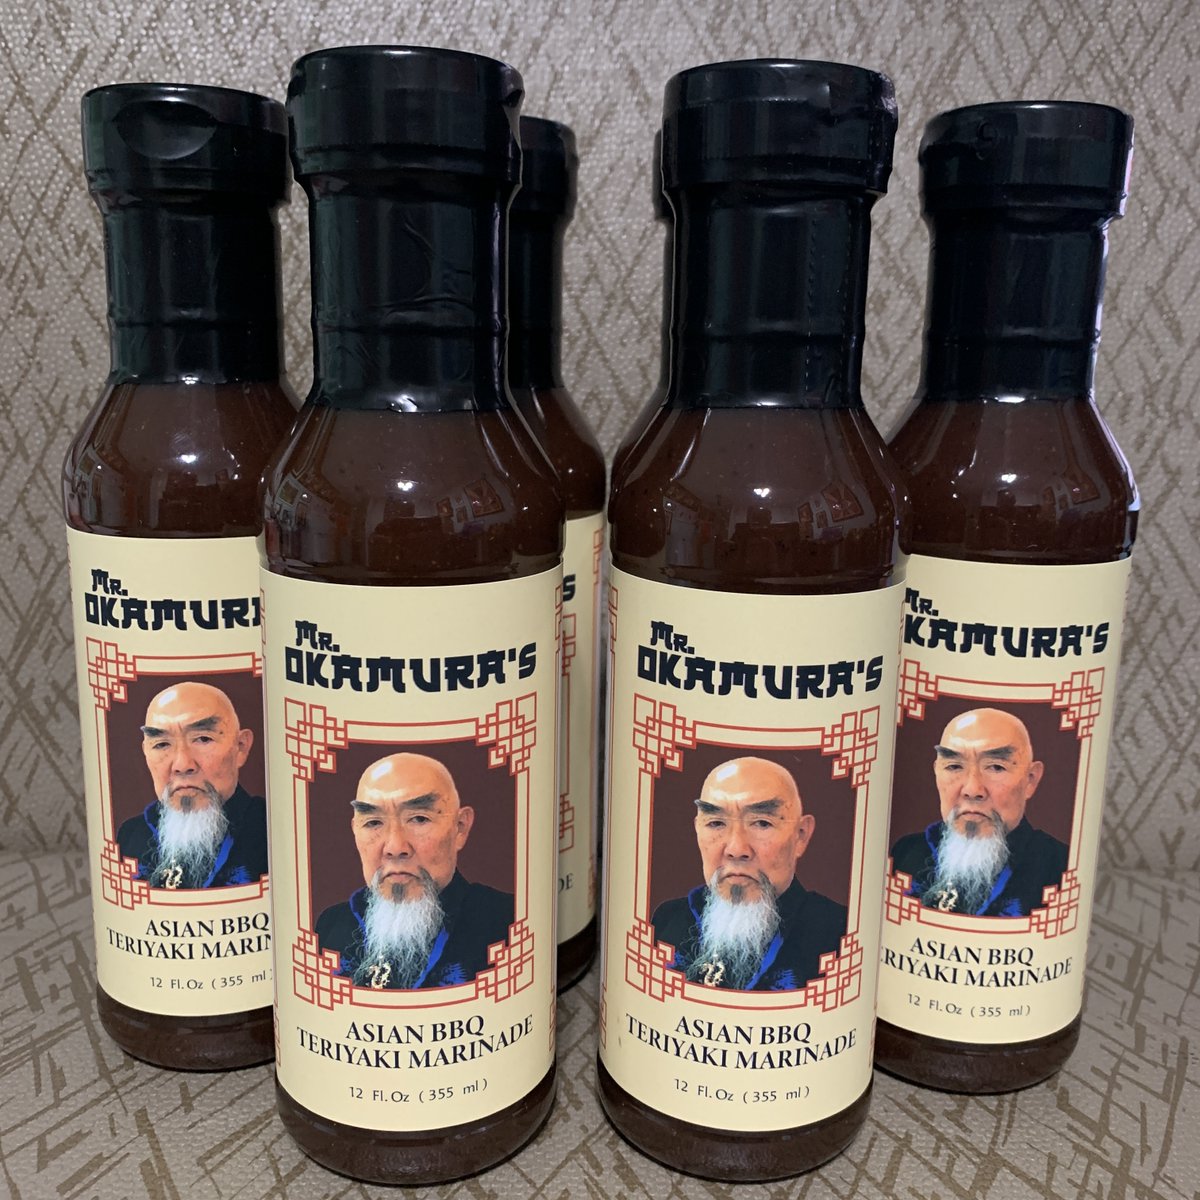 Available at geraldokamura.com/fan-club/ Mr. Okamura’s Asian BBQ, Teriyaki Marinade ,entwines the umami-rich flavors of soy sauce, ginger, and garlic with the subtle heat of cayenne chiles and the robust essence of molasses, creating a marinade that elevates any dish it touches.